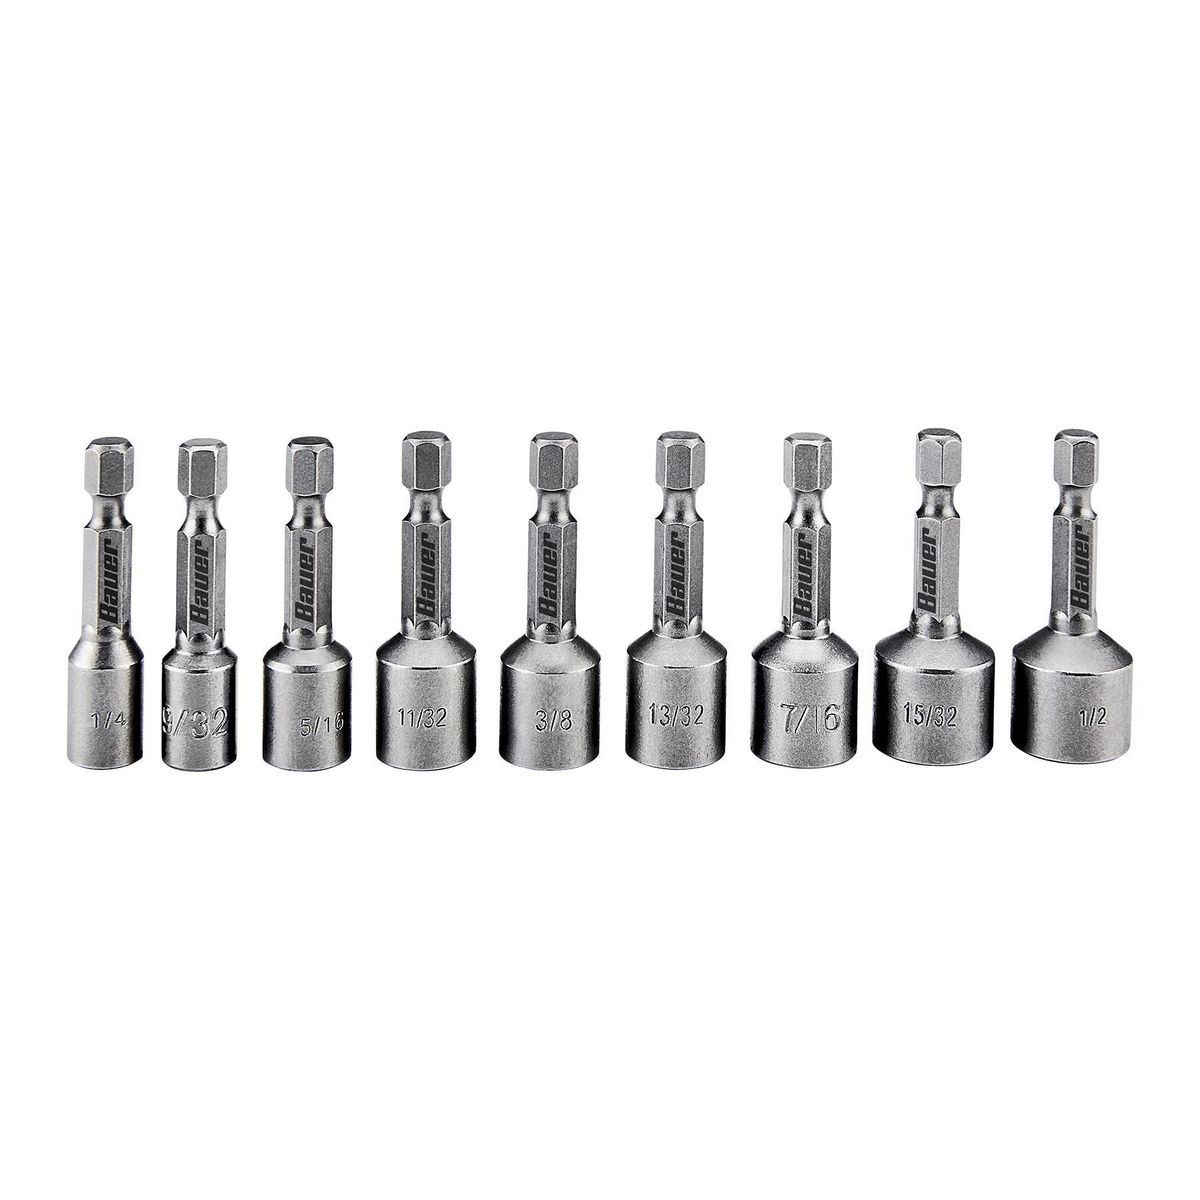 1-3/4 in. Impact Rated Magnetic SAE Nut Setter Set, 9 Piece